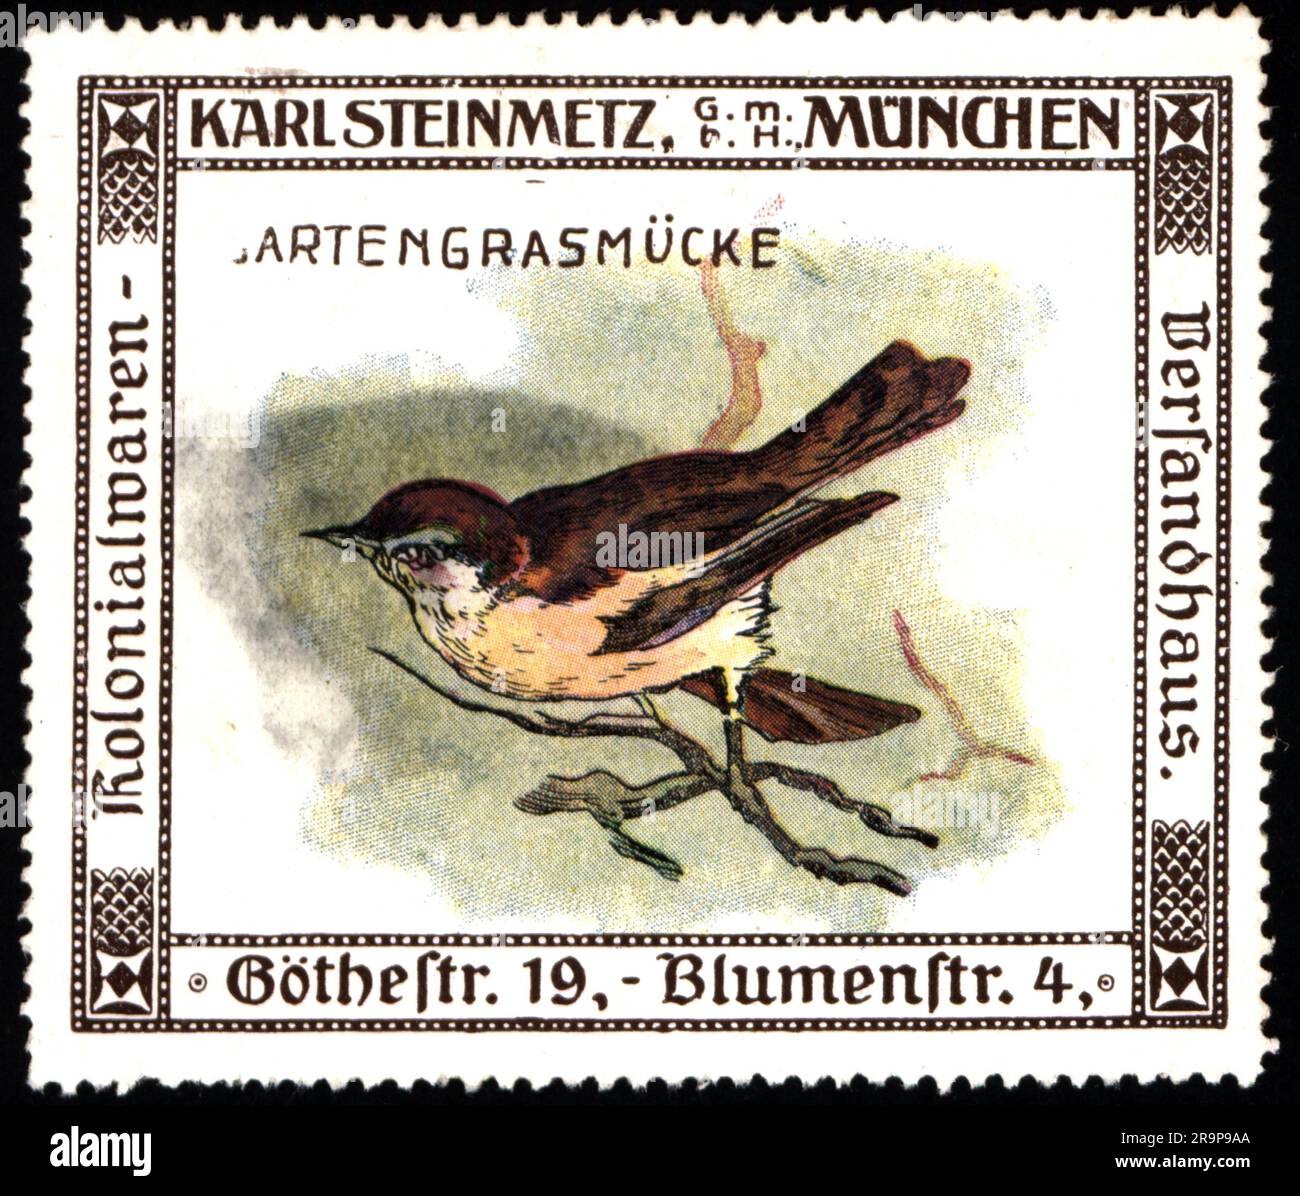 advertising, food, colonial goods catalogue company Karl Steinmetz GmbH, Munich, poster stamp, ADDITIONAL-RIGHTS-CLEARANCE-INFO-NOT-AVAILABLE Stock Photo